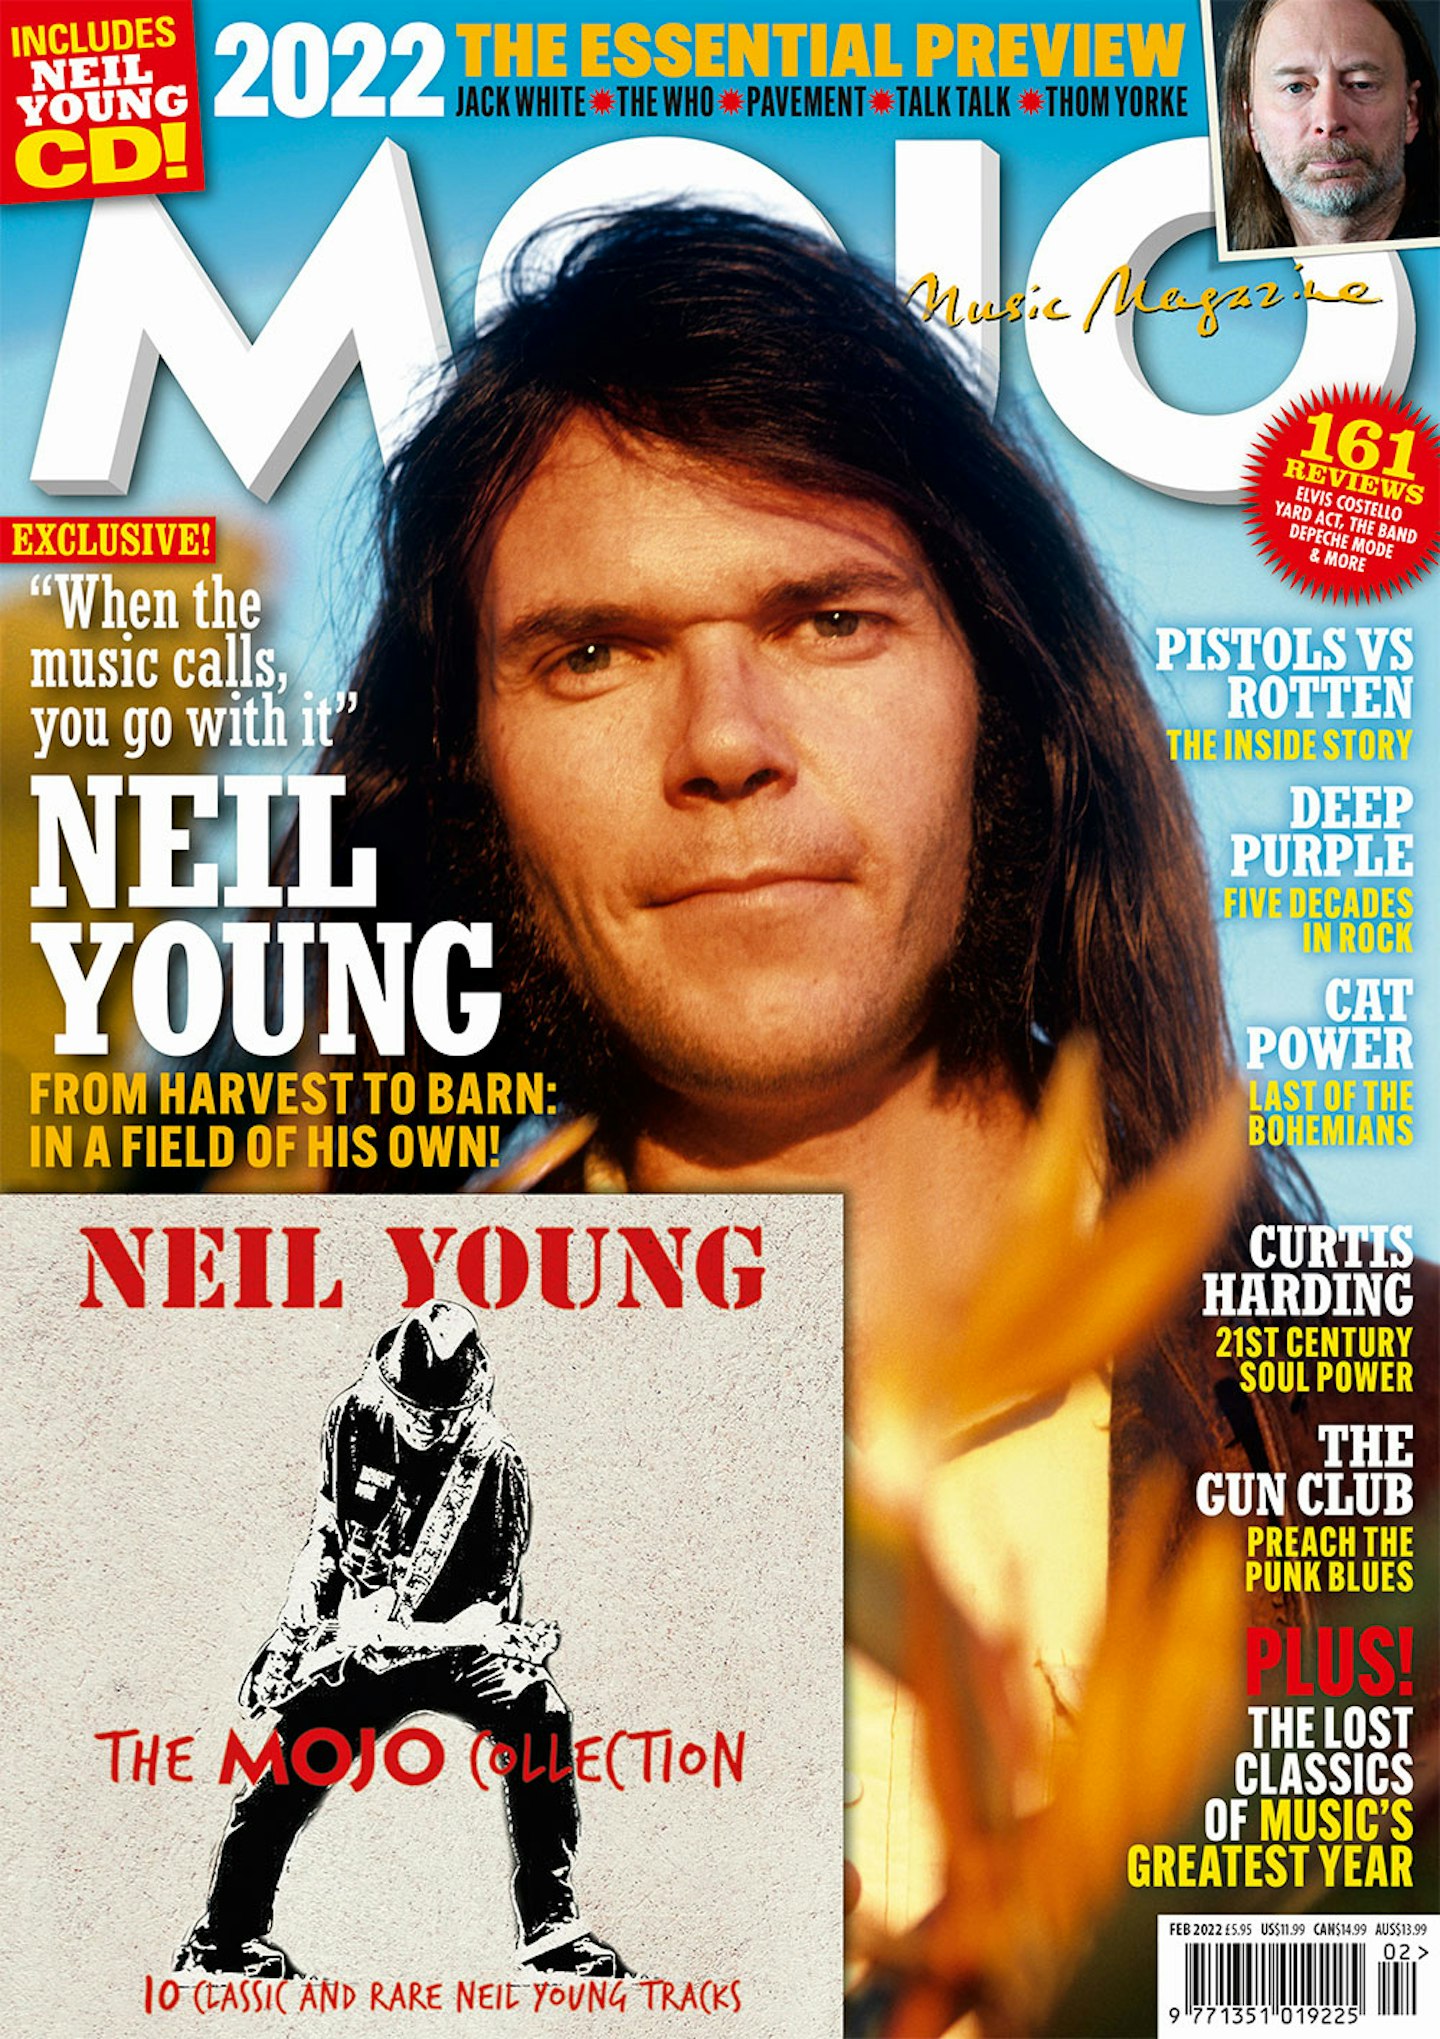 MOJO 339 magazine cover, featuring Neil Young and Neil Young CD